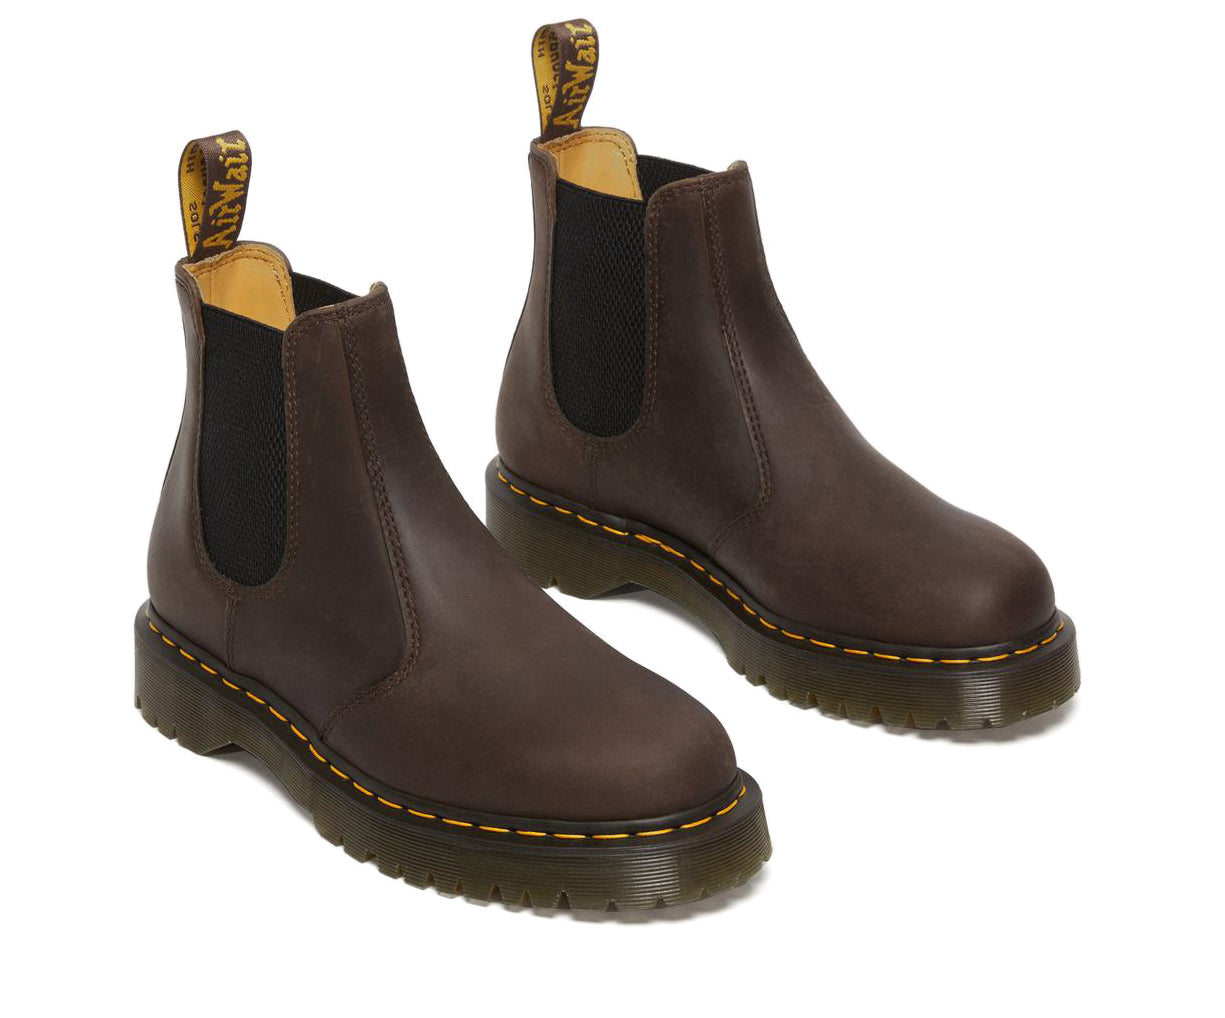 A brown leather chelsea boot from Dr. Martens.